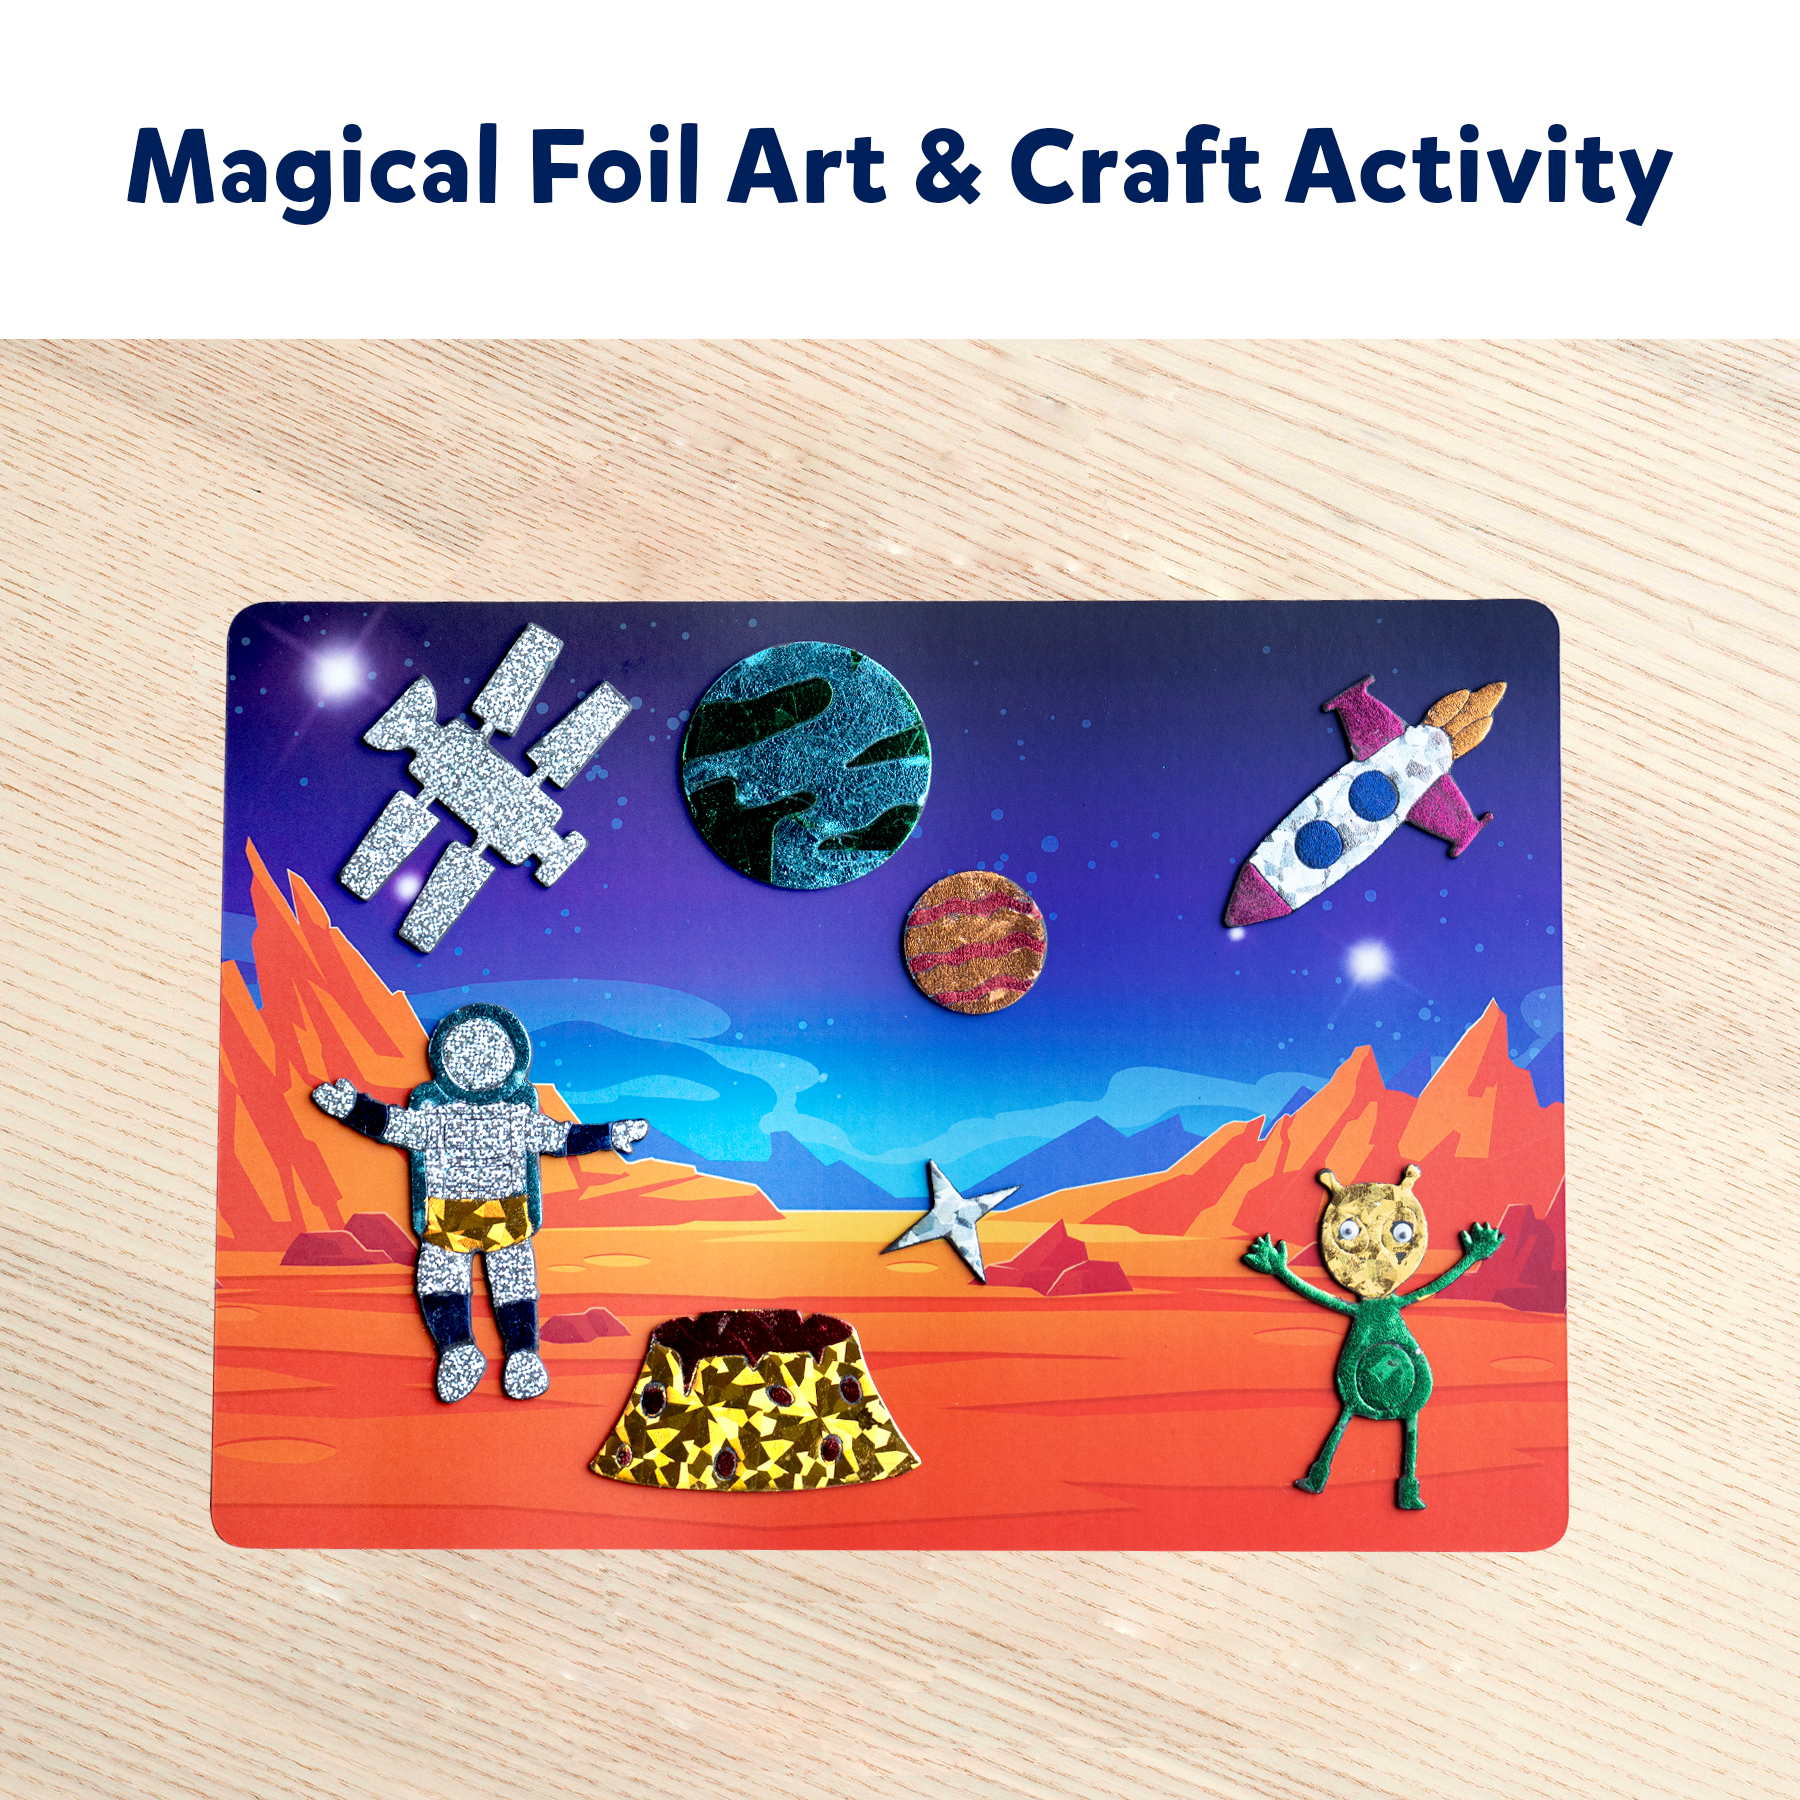 Skillmatics Art & Craft Activity - Foil Fun, No Mess Art, 10 Unique & Sparkly Space Themed Pictures, Ages 4 to 9